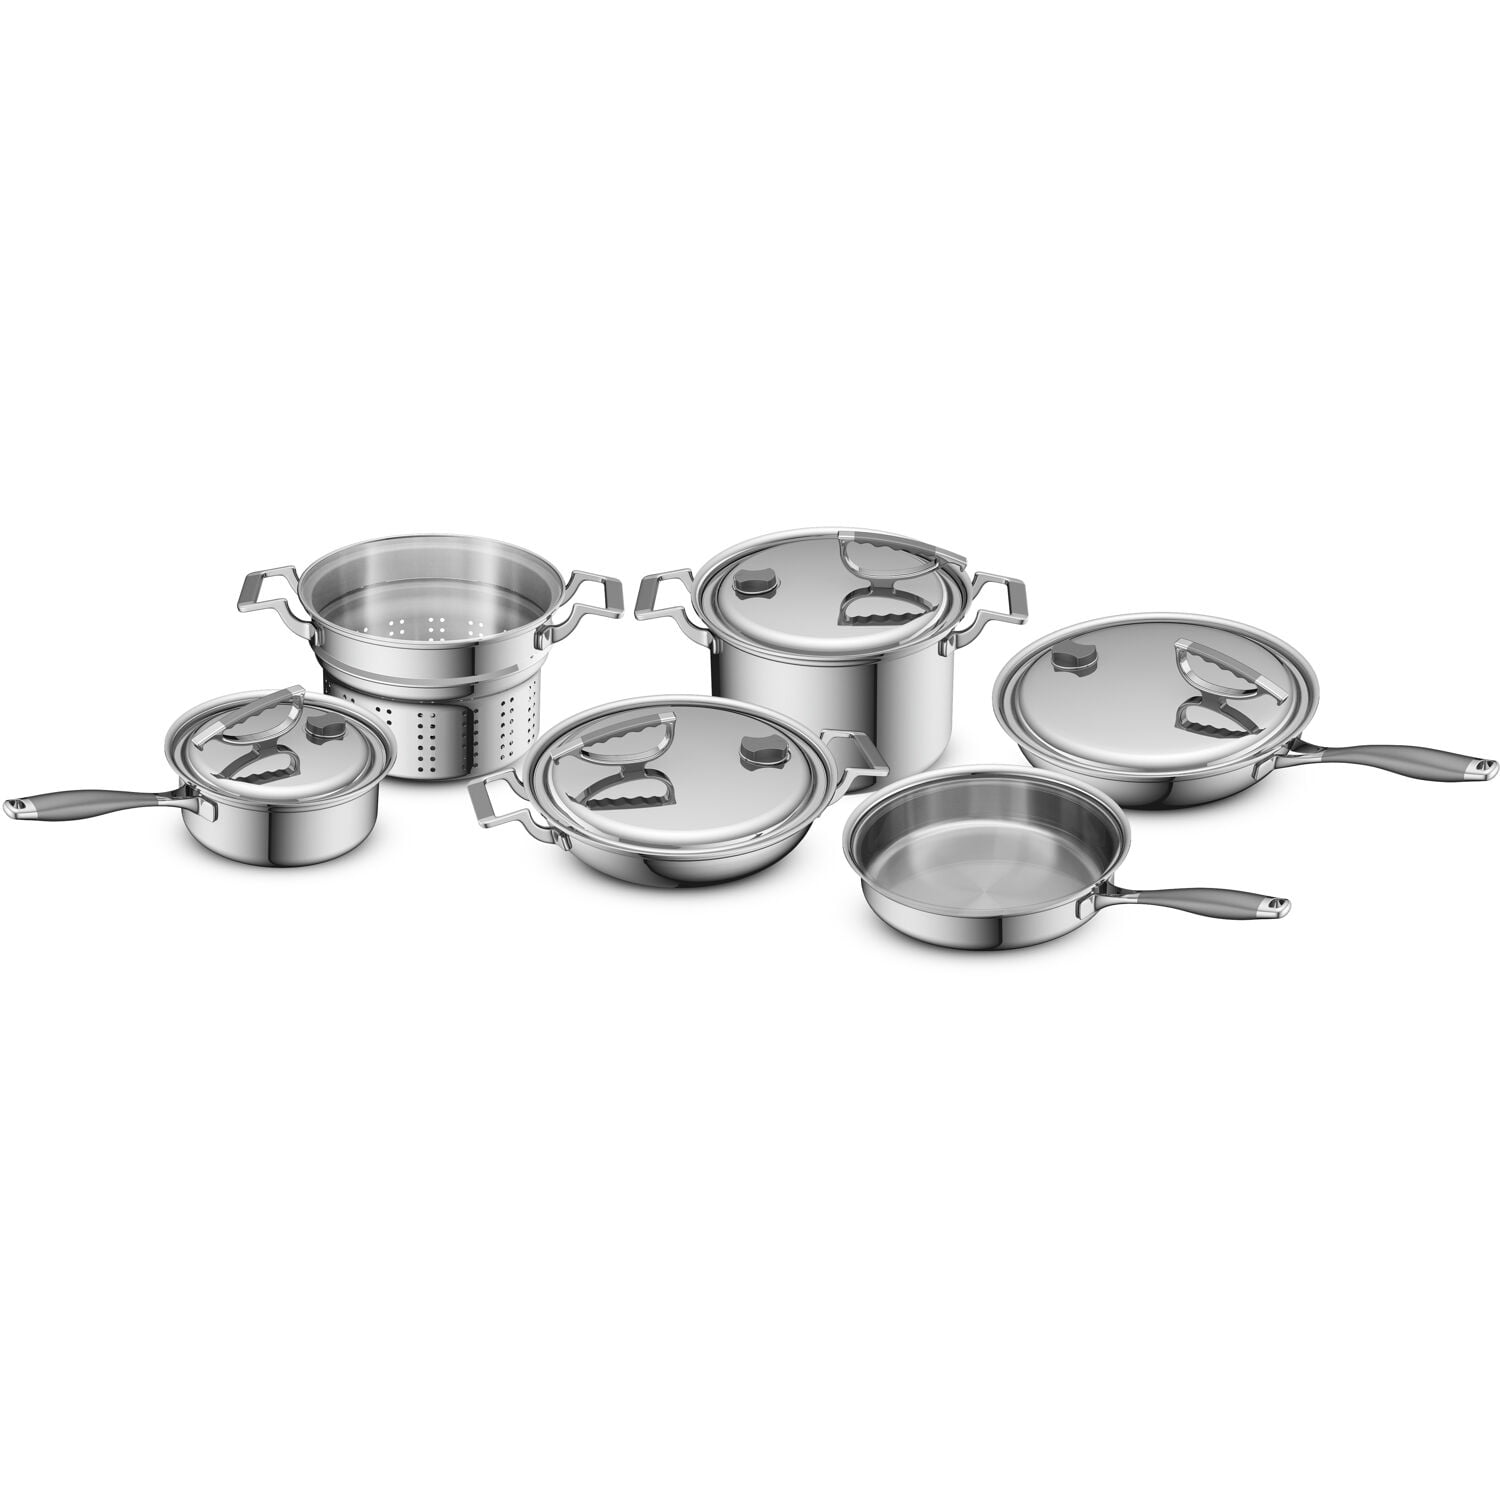  Le Creuset Tri-Ply Stainless Steel Rondeau Pan, 4.5